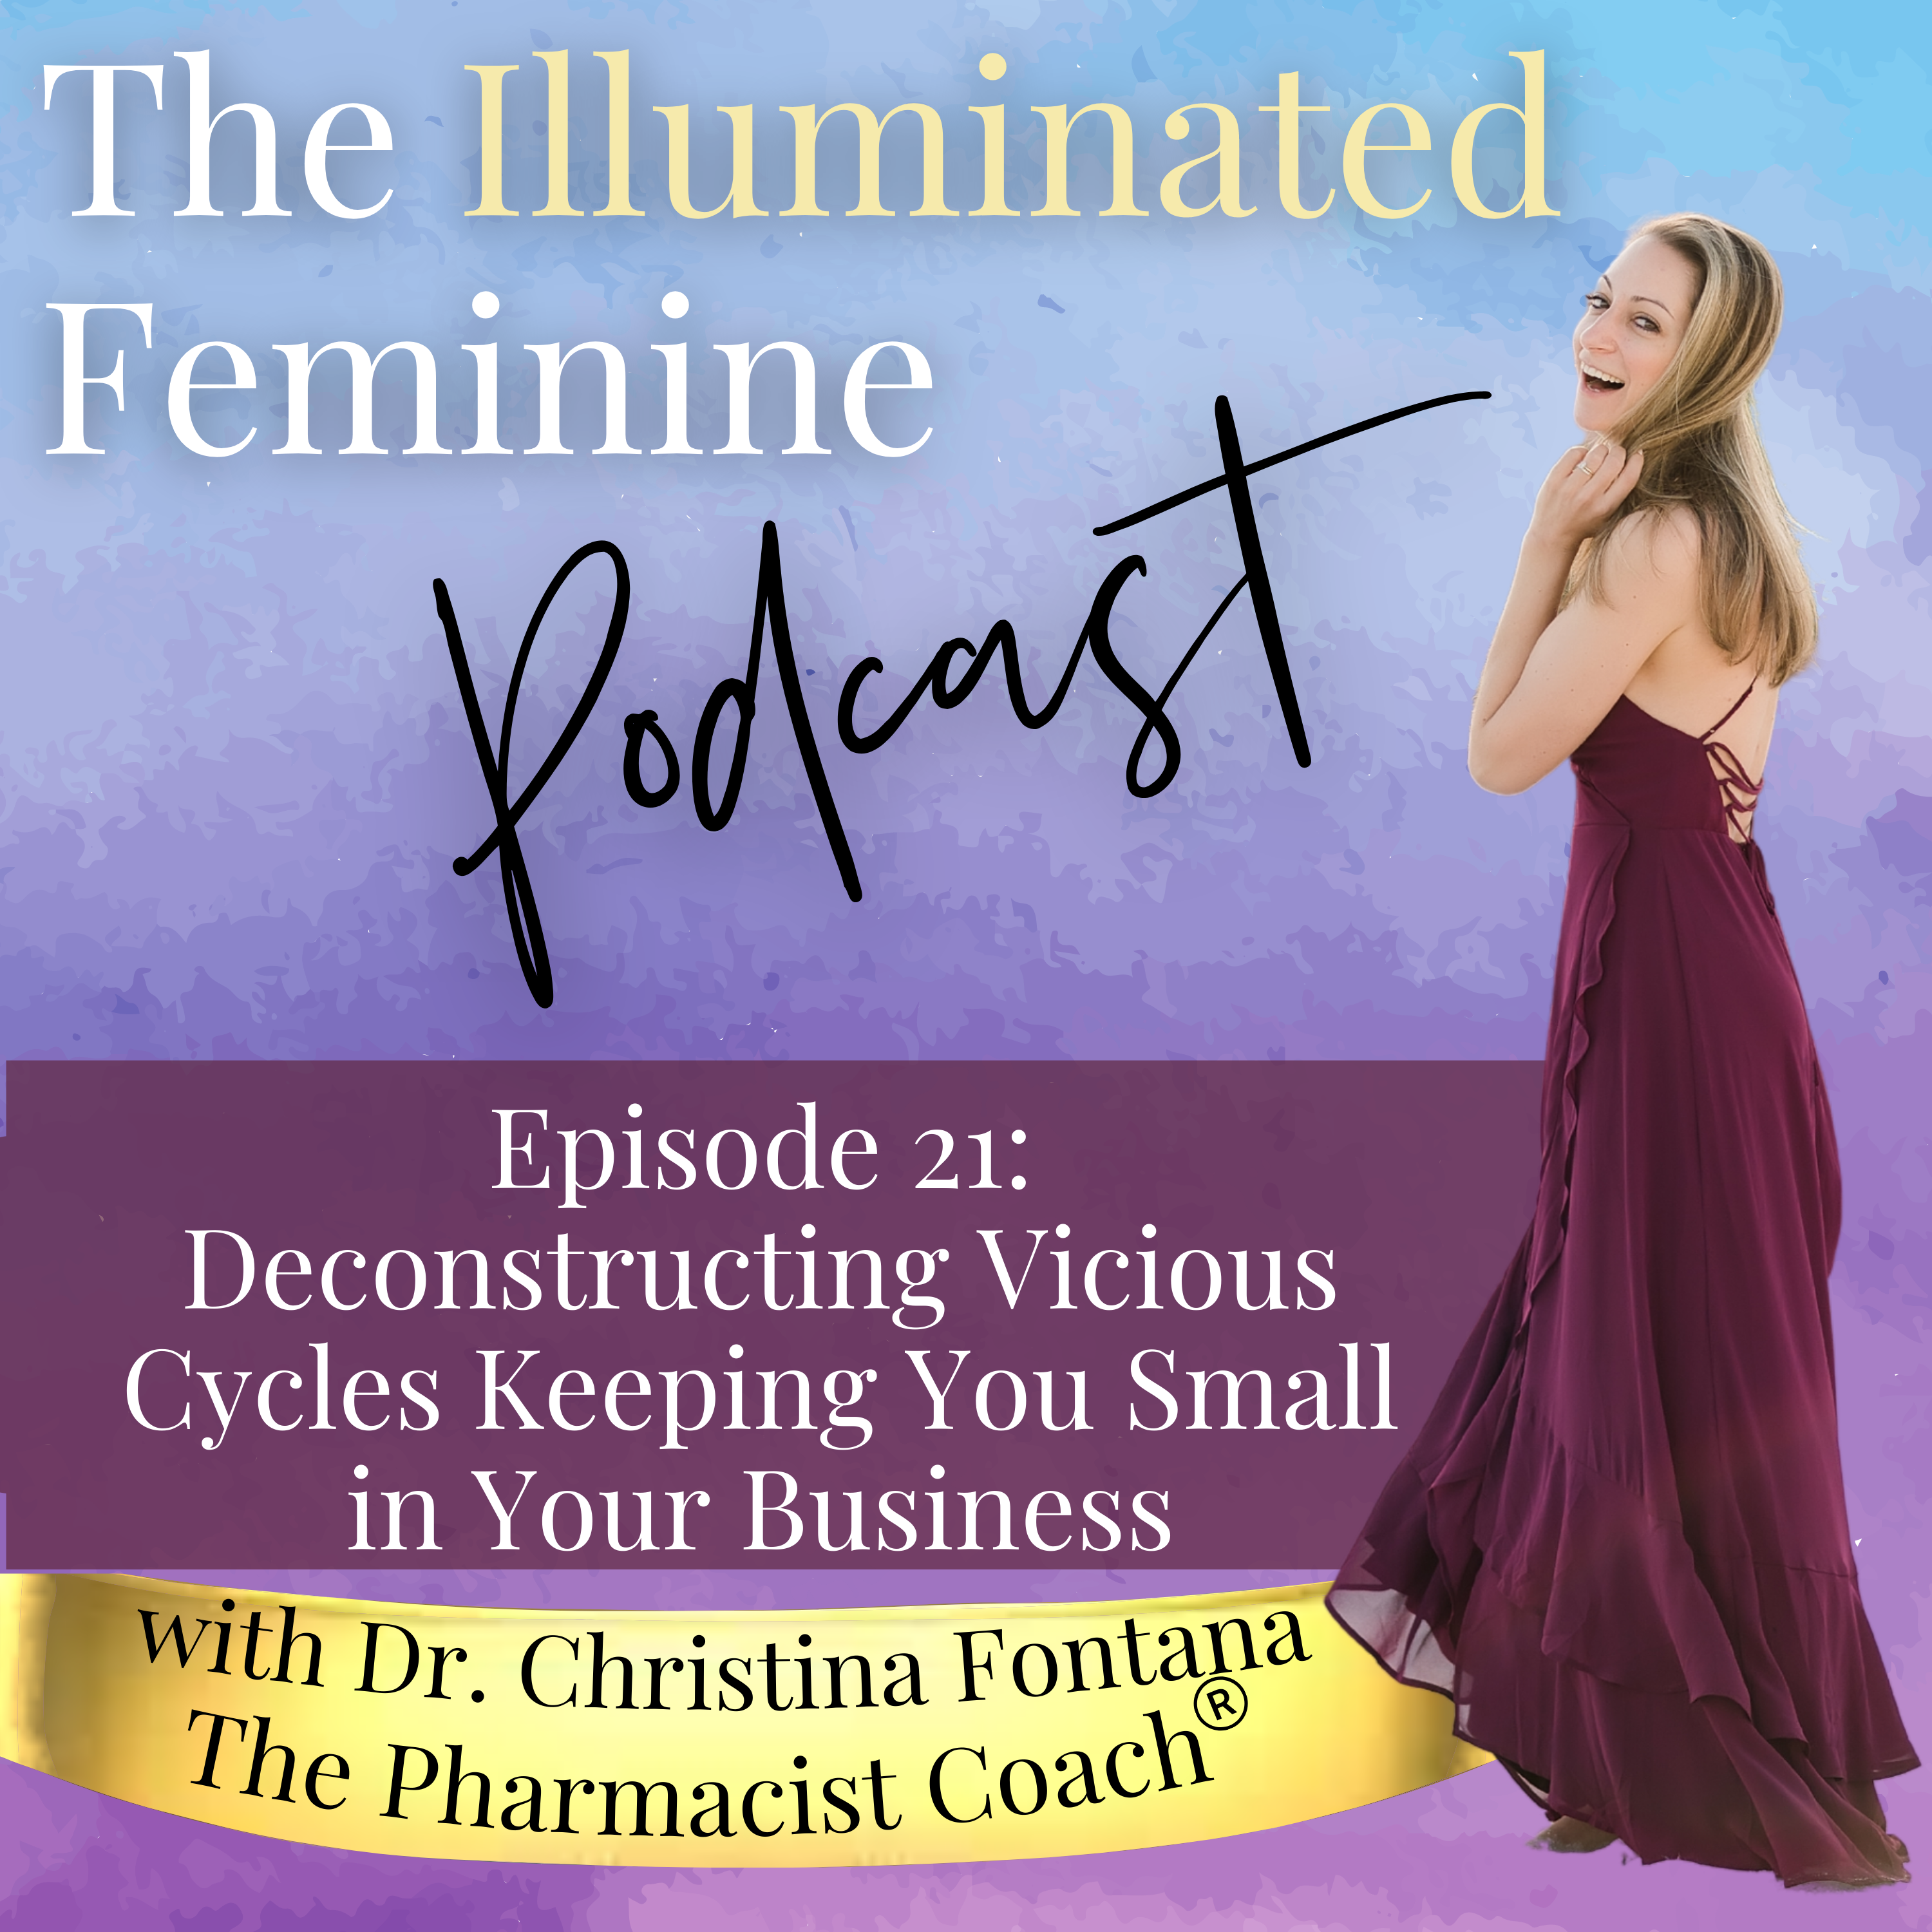 Featured image for “Illuminated Feminine Podcast Episode 21. Deconstructing Vicious Cycles Keeping You Small in Your Business”